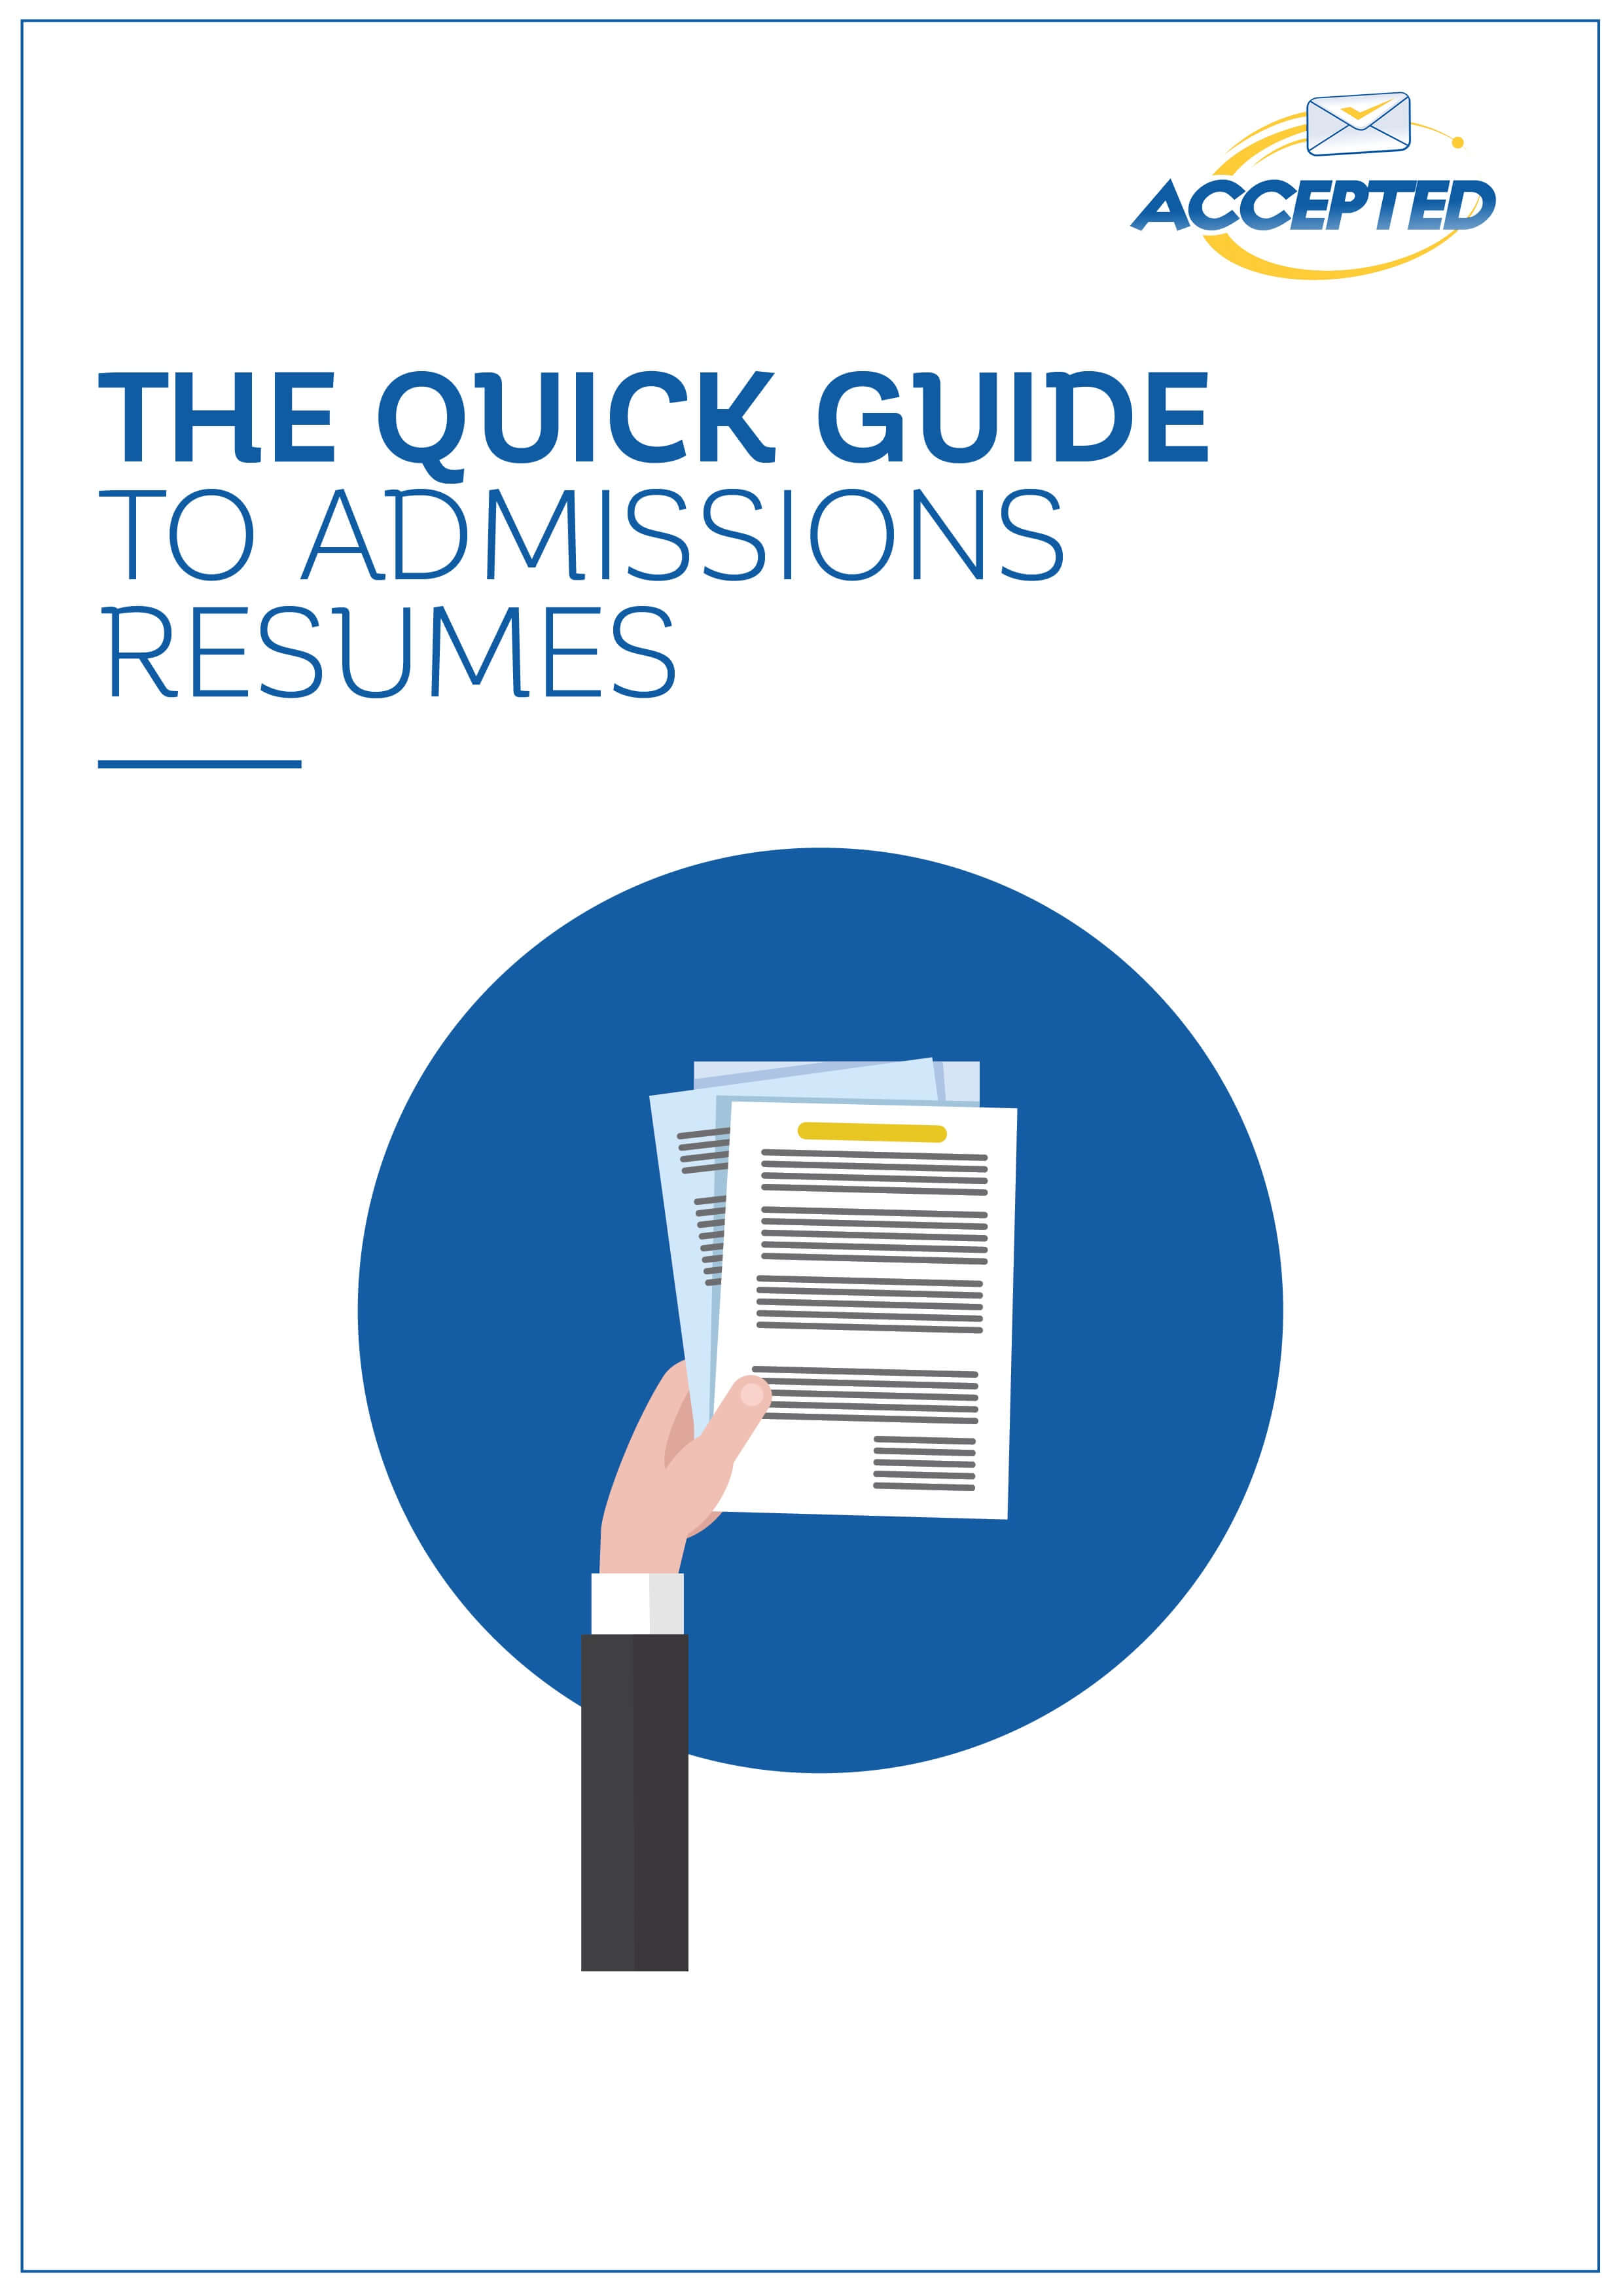 The Quick Guide to Admissions Resumes